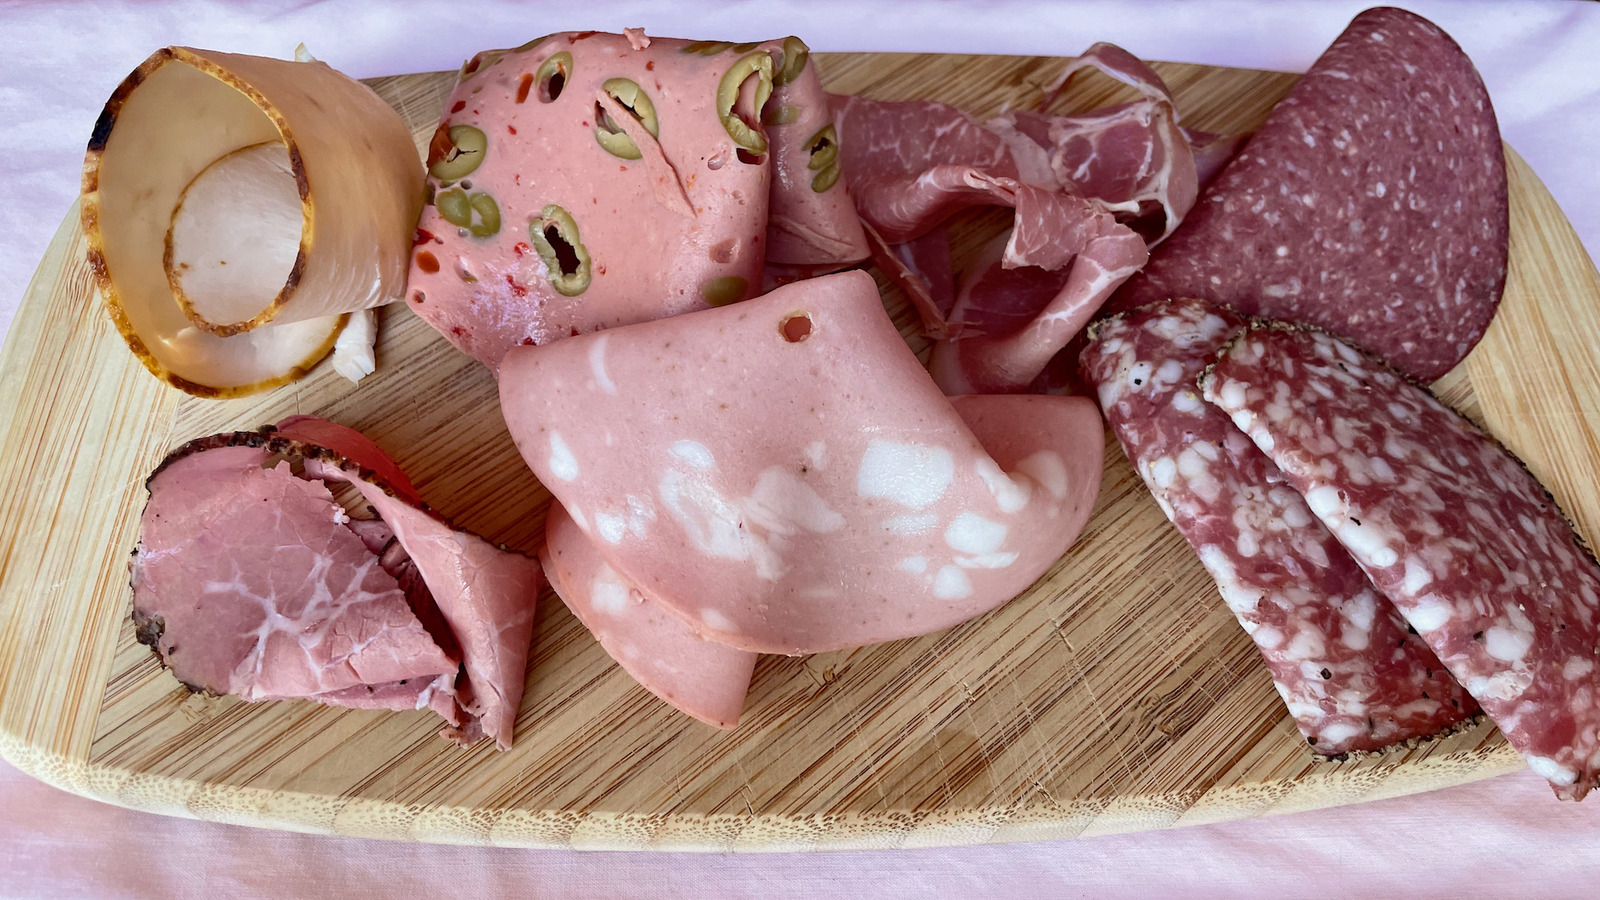 https://www.tastingtable.com/img/gallery/ranking-boars-head-deli-meat-from-worst-to-best/l-intro-1664808724.jpg